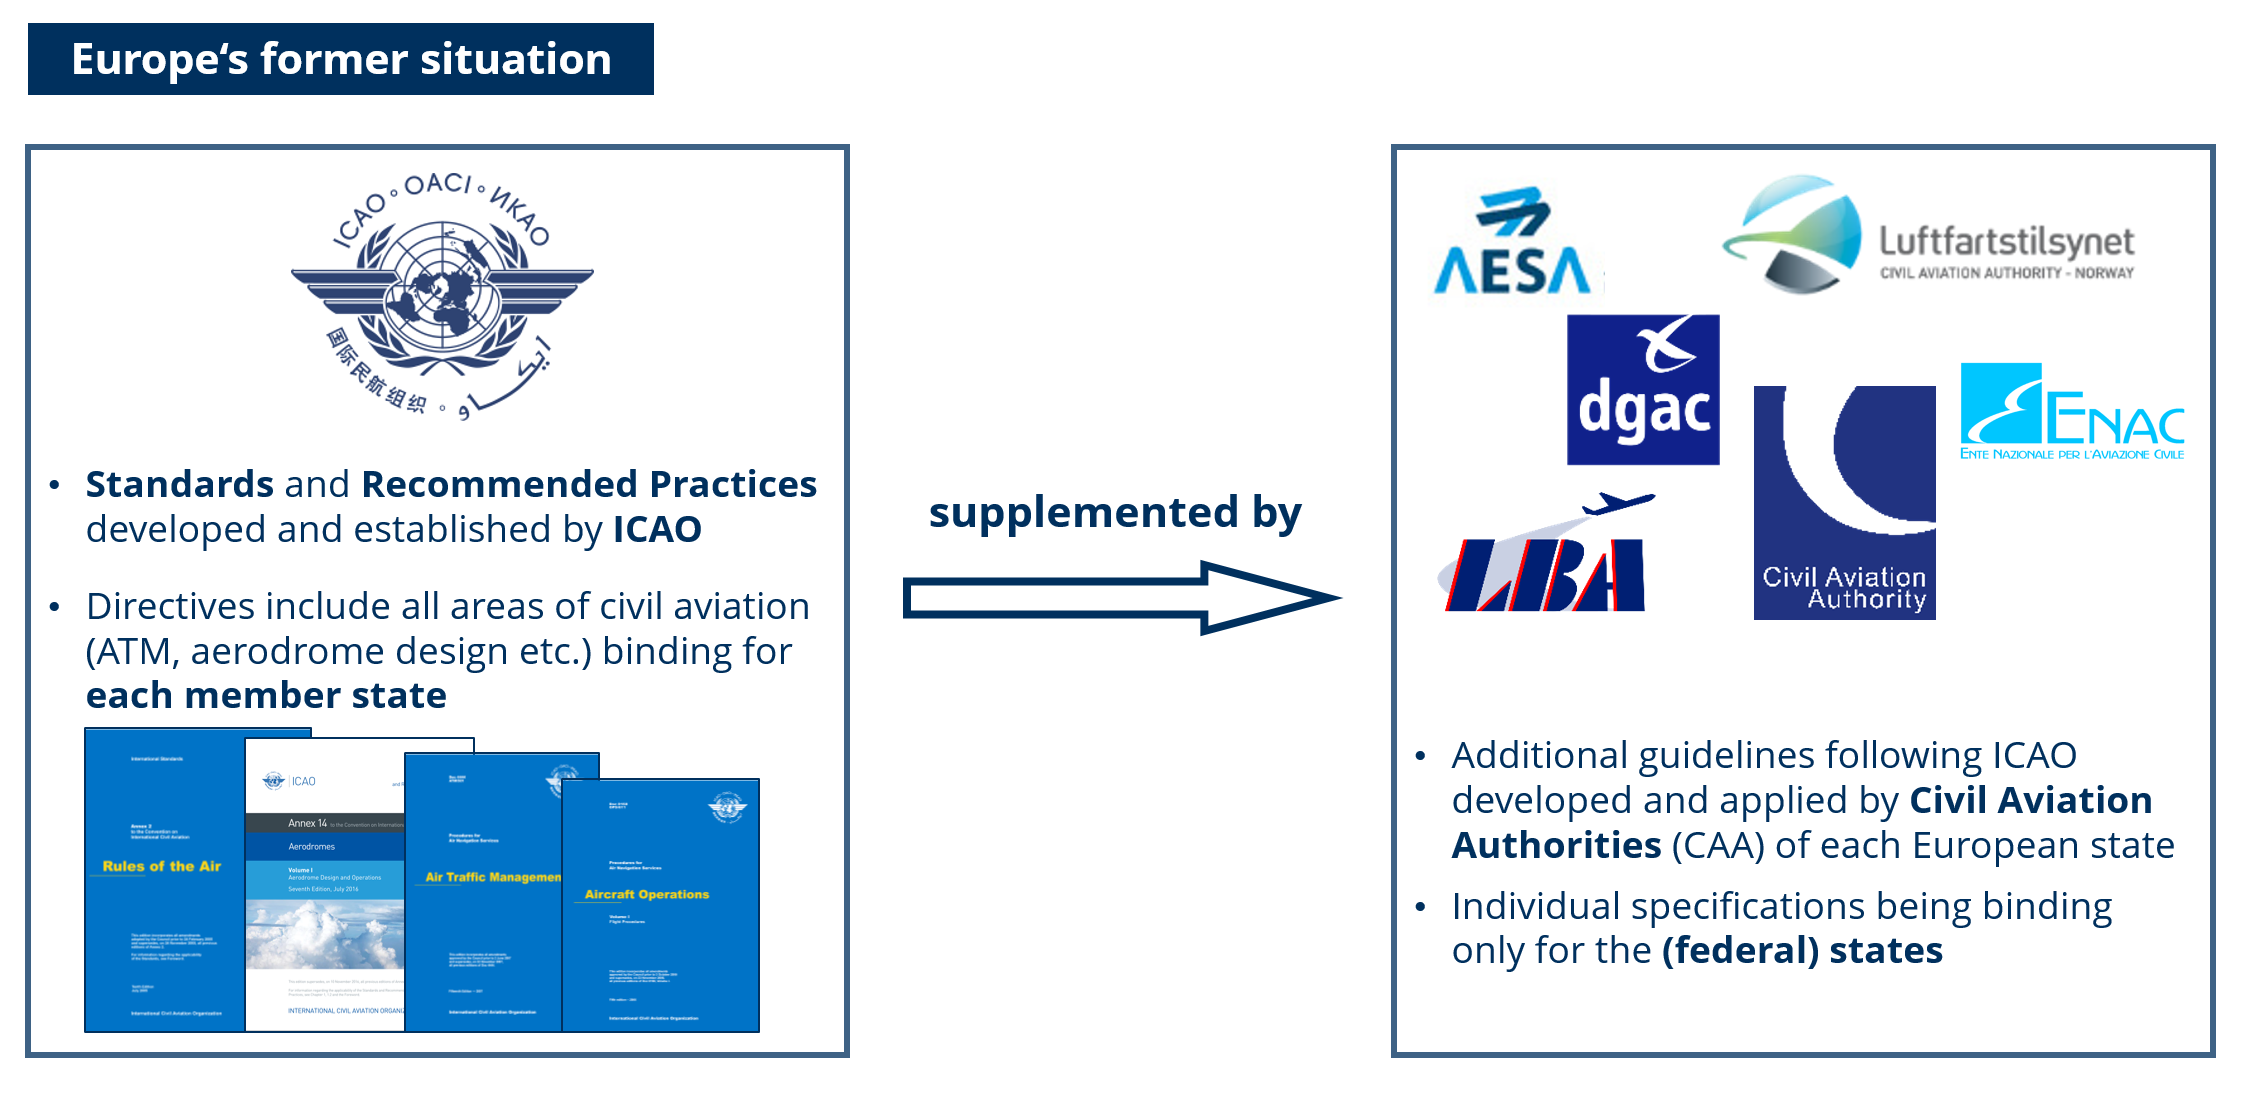 Previous relationship between ICAO regulations and national aviation authorities (© GfL mbH)